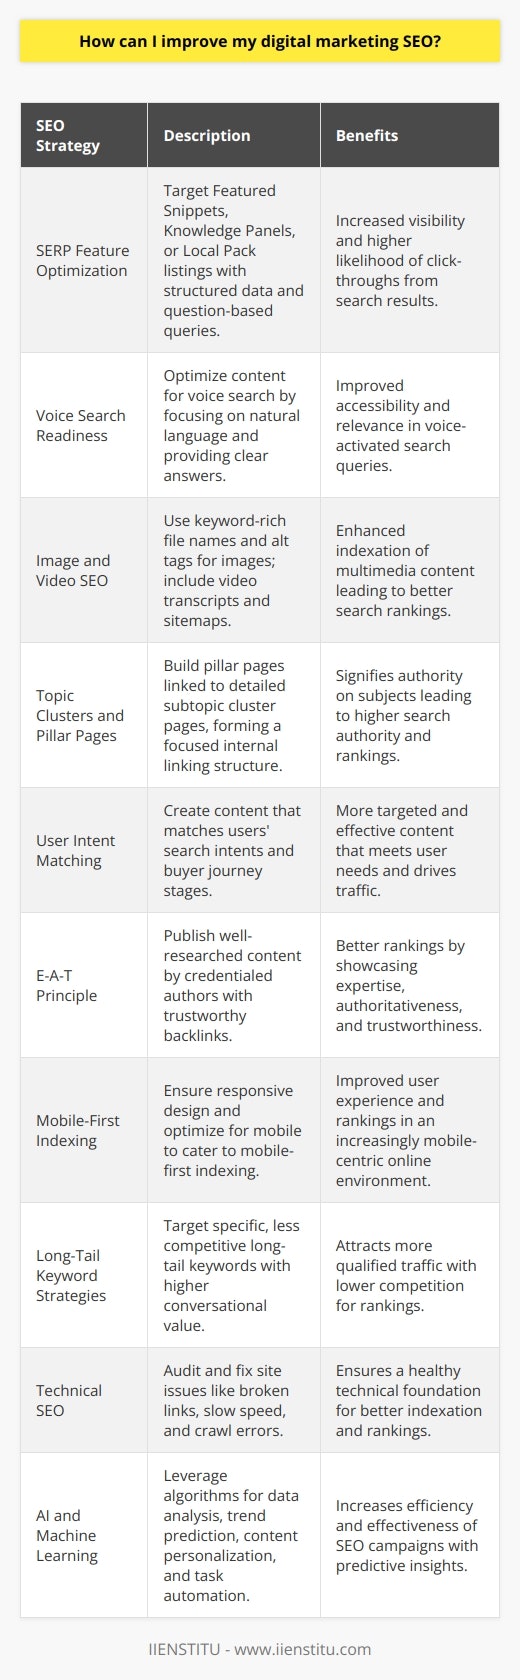 Improving your digital marketing SEO is pivotal in driving organic traffic and enhancing online visibility. Here’s how you can refine your SEO strategies using advanced yet underutilized techniques:1. SERP Feature Optimization: To go beyond traditional organic rankings, aim for Search Engine Results Page (SERP) features such as Featured Snippets, Knowledge Panels, or Local Pack listings. These often require structured data markup and optimizing for question-based queries.2. Voice Search Readiness: With the rising prominence of voice-operated devices, optimize your content for voice search by focusing on natural language and question-based queries. Ensure that your content provides clear, concise answers to common questions in your niche.3. Image and Video SEO: Optimize multimedia content by using descriptive, keyword-rich file names and alt tags for images, and by leveraging video transcripts and providing video sitemaps. These practices make it easier for search engines to comprehend and index your multimedia content.4. Topic Clusters and Pillar Pages: Create comprehensive pillar pages that provide a broad overview of a core topic, linking out to more detailed cluster pages which focus on subtopics. This internal linking structure helps search engines recognize your authority on a subject and can lead to higher rankings.5. User Intent Matching: Rather than focusing solely on keywords, pay close attention to the user intent behind search queries. Create content that aligns with the various stages of the buyer's journey, from awareness to decision-making.6. E-A-T Principle: E-A-T stands for Expertise, Authoritativeness, and Trustworthiness. Websites that demonstrate these qualities tend to rank higher. This means having well-researched content, credentialed authors, and strong, trustworthy backlinks.7. Mobile-First Indexing: With mobile-first indexing, Google predominantly uses the mobile version of a site for indexing and ranking. To ensure your site is mobile-friendly, use responsive design, optimize page speed, and avoid mobile-specific errors.8. Long-Tail Keyword Strategies: Instead of targeting the most competitive keywords, aim for longer, more specific keyword phrases that are less competitive but have high conversational value.9. Technical SEO: Ensure your website's technical health by regularly auditing for issues like broken links, slow page speeds, and crawl errors. Using tools for site audits can help identify and fix technical SEO problems.10. AI and Machine Learning: Experiment with machine learning algorithms to analyze large data sets from your campaigns, predict trends, personalize content, and automate certain SEO tasks for efficiency.Finally, the role of continuous learning cannot be overstated. Platforms such as IIENSTITU offer specialized courses in digital marketing and SEO that ensure you're up-to-date with the latest strategies and tools. A commitment to education, coupled with a strategic approach to SEO, will position your digital marketing efforts for success in the rapidly evolving online landscape.